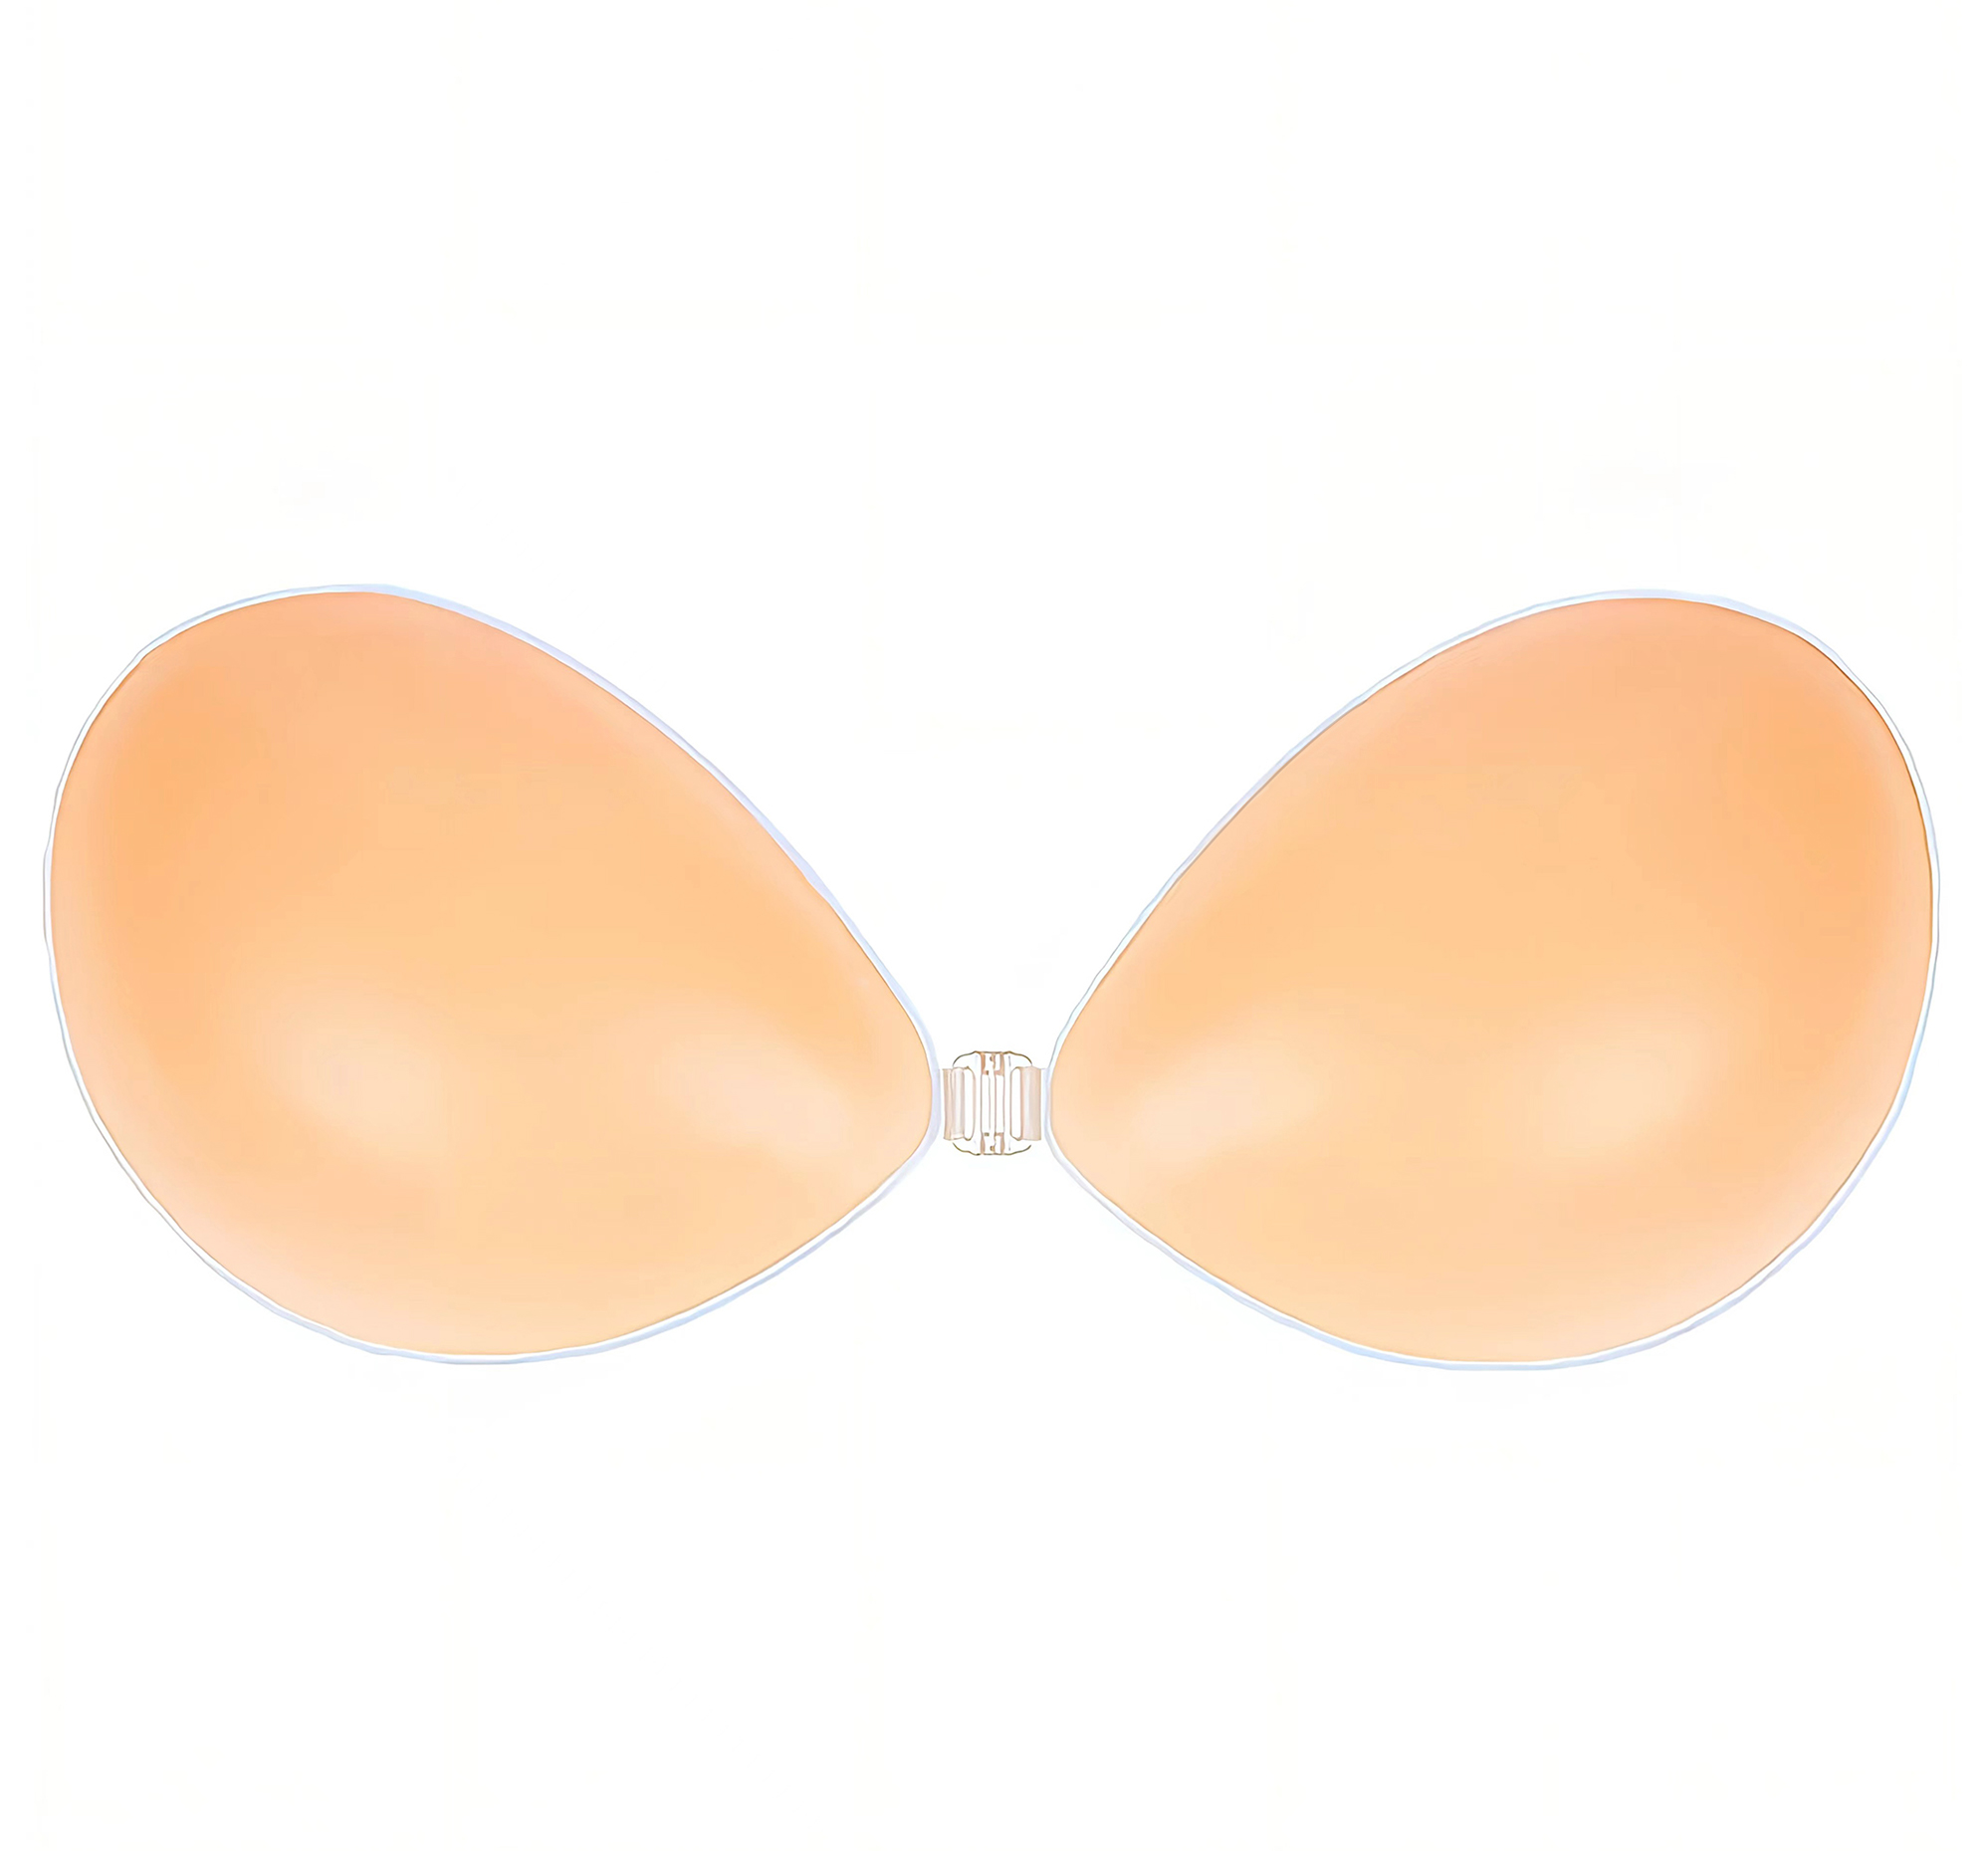 DEPOVOR Adhesive Strapless Backless Bra Push Up Invisible Sticky